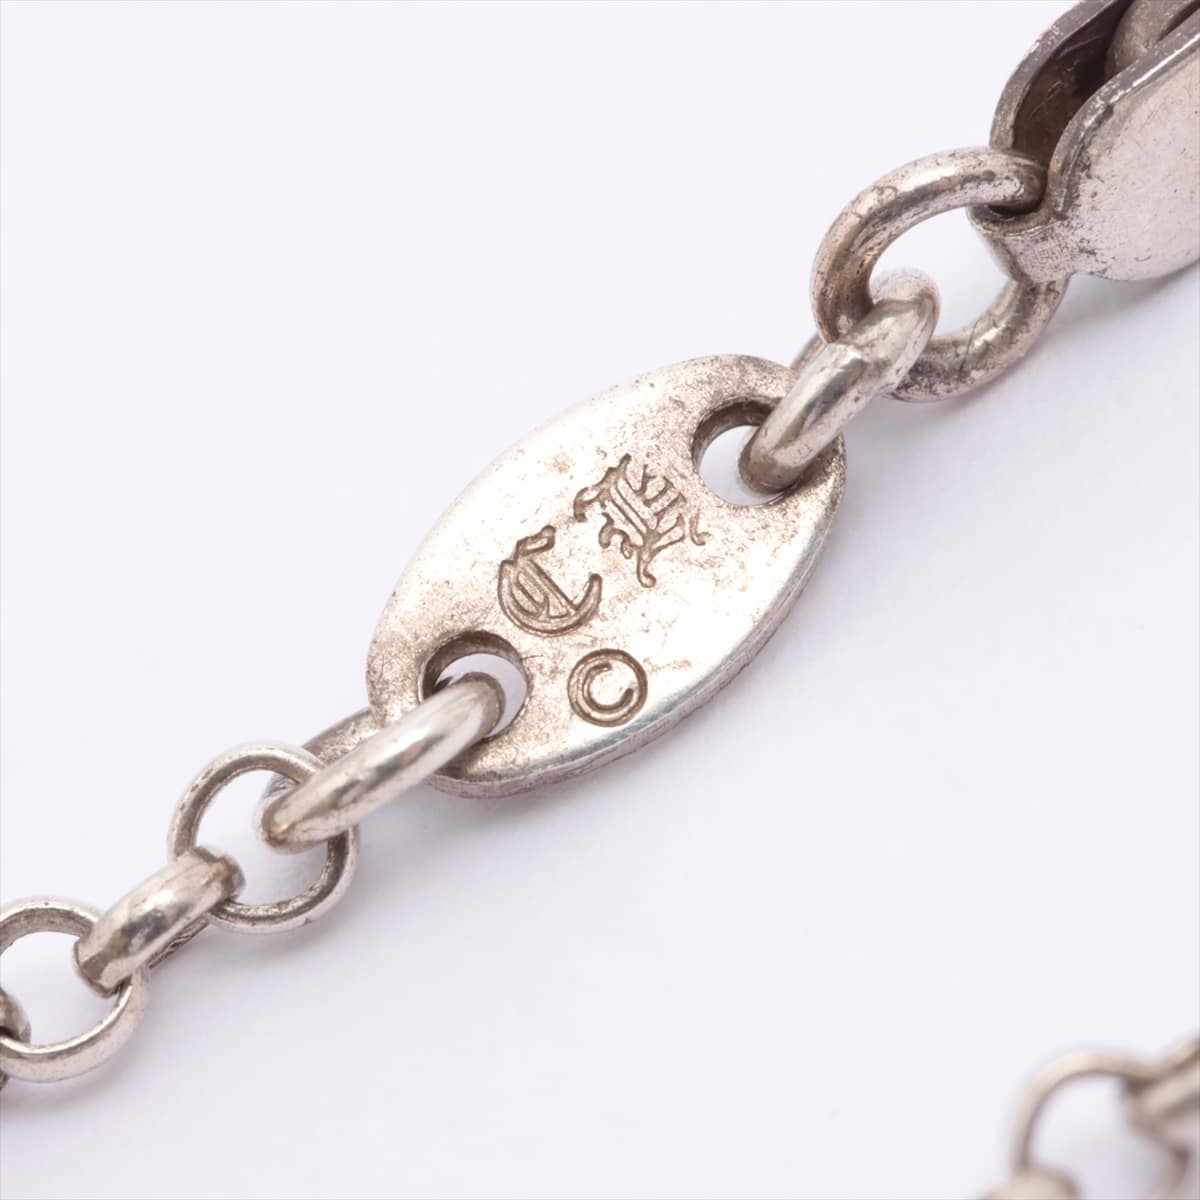 Chrome Hearts Roll Chain 18 Inches Necklace 925 4.8g